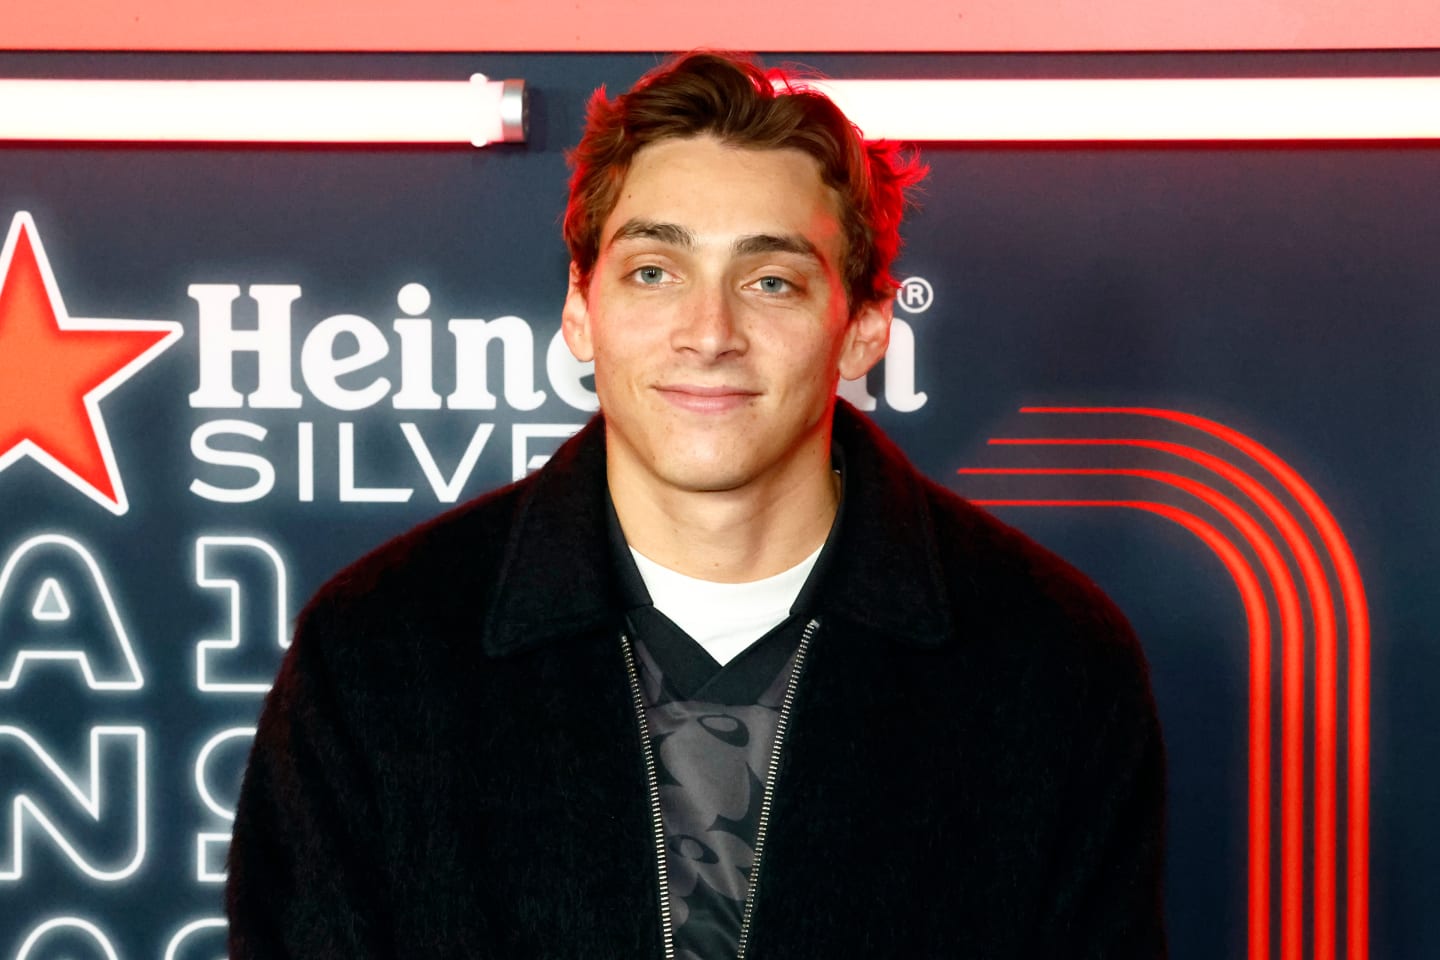 LAS VEGAS, NV - NOVEMBER 18: Armand Duplantis, Swedish-American track and field athlete, poses for photos prior to the inaugural Formula 1 Heineken Silver Las Vegas Gran Prix on November 18, 2023 on the Las Vegas Street Circuit in Las Vegas, Nevada. (Photo by Jeff Speer/Icon Sportswire via Getty Images)